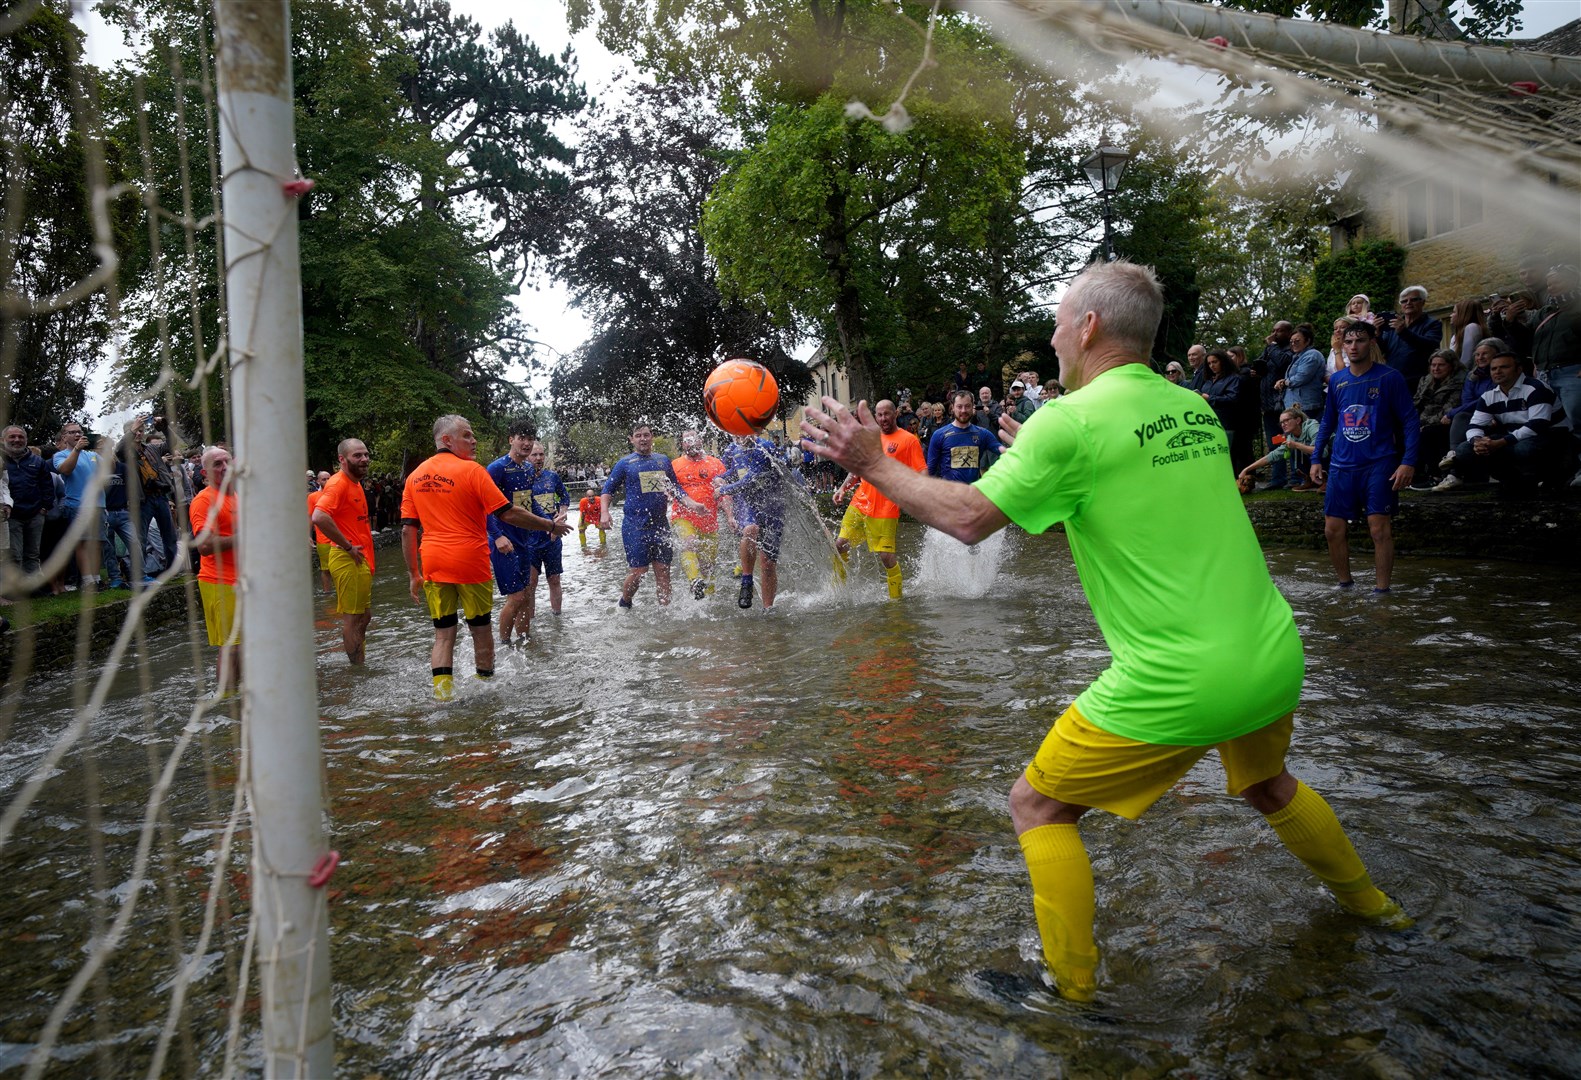 Footballers from Bourton Rovers battle it out (Ben Birchall/PA)